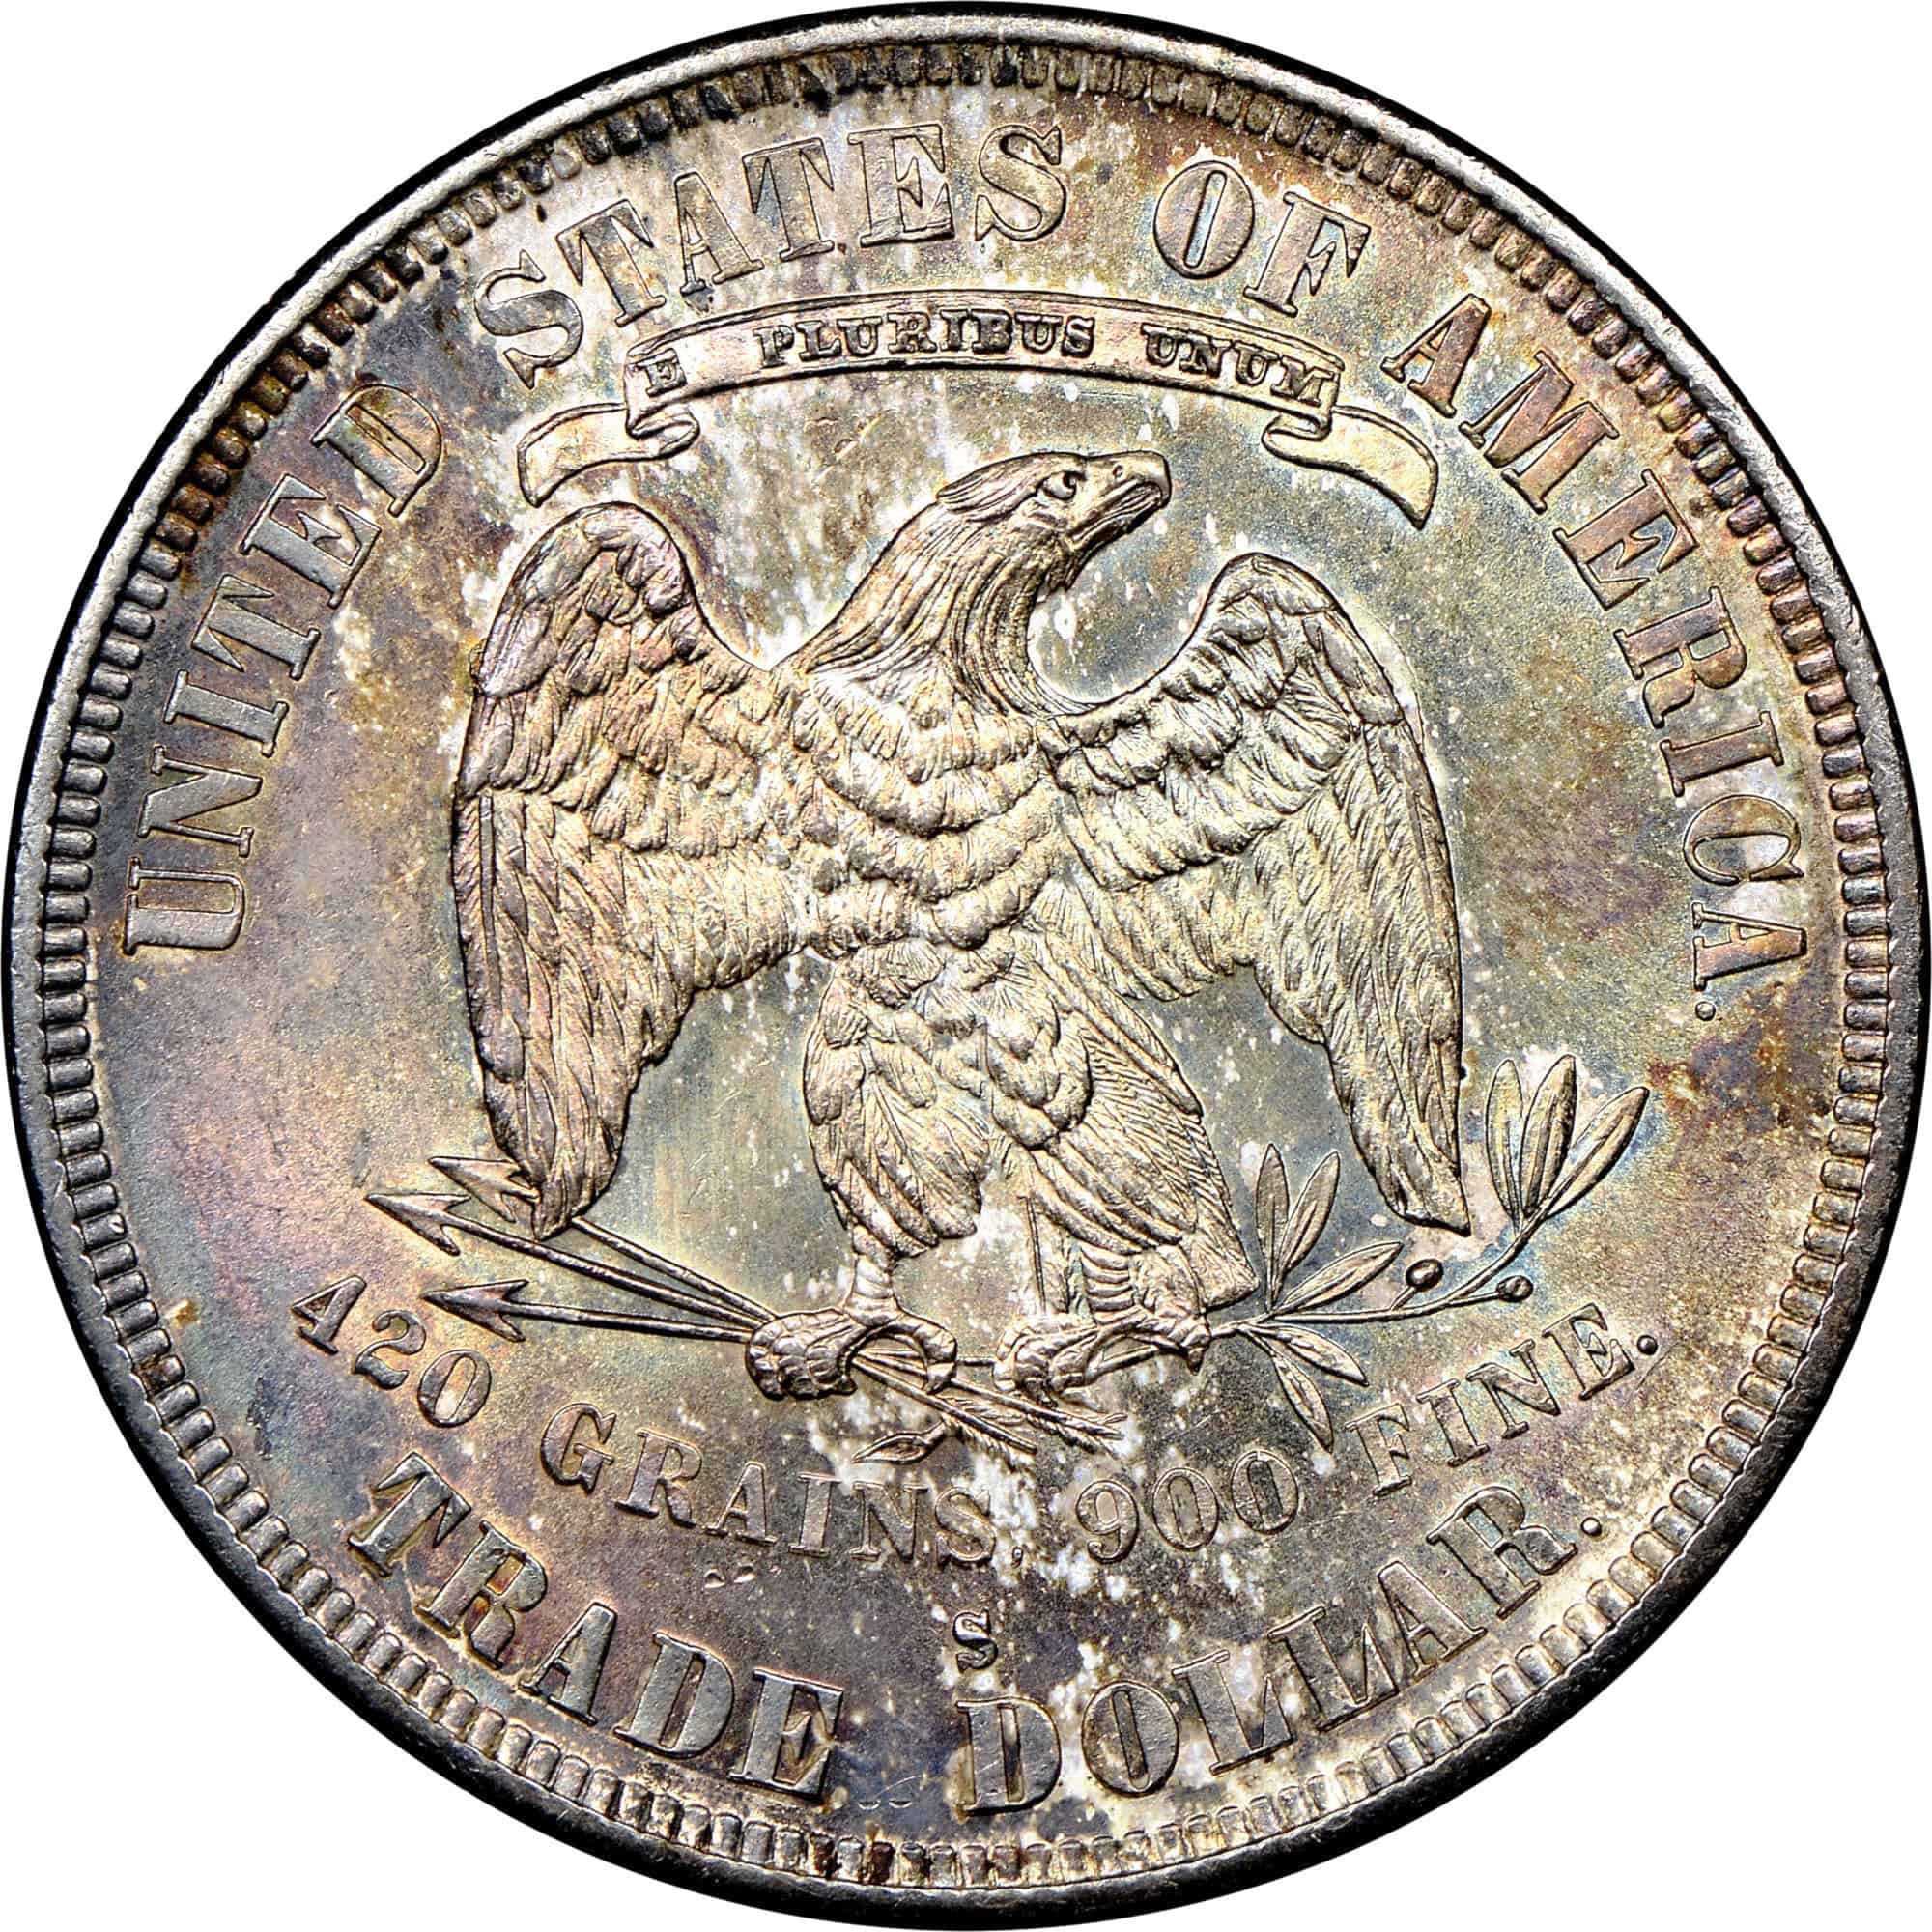 The Reverse of the 1878 Silver Trade Dollar